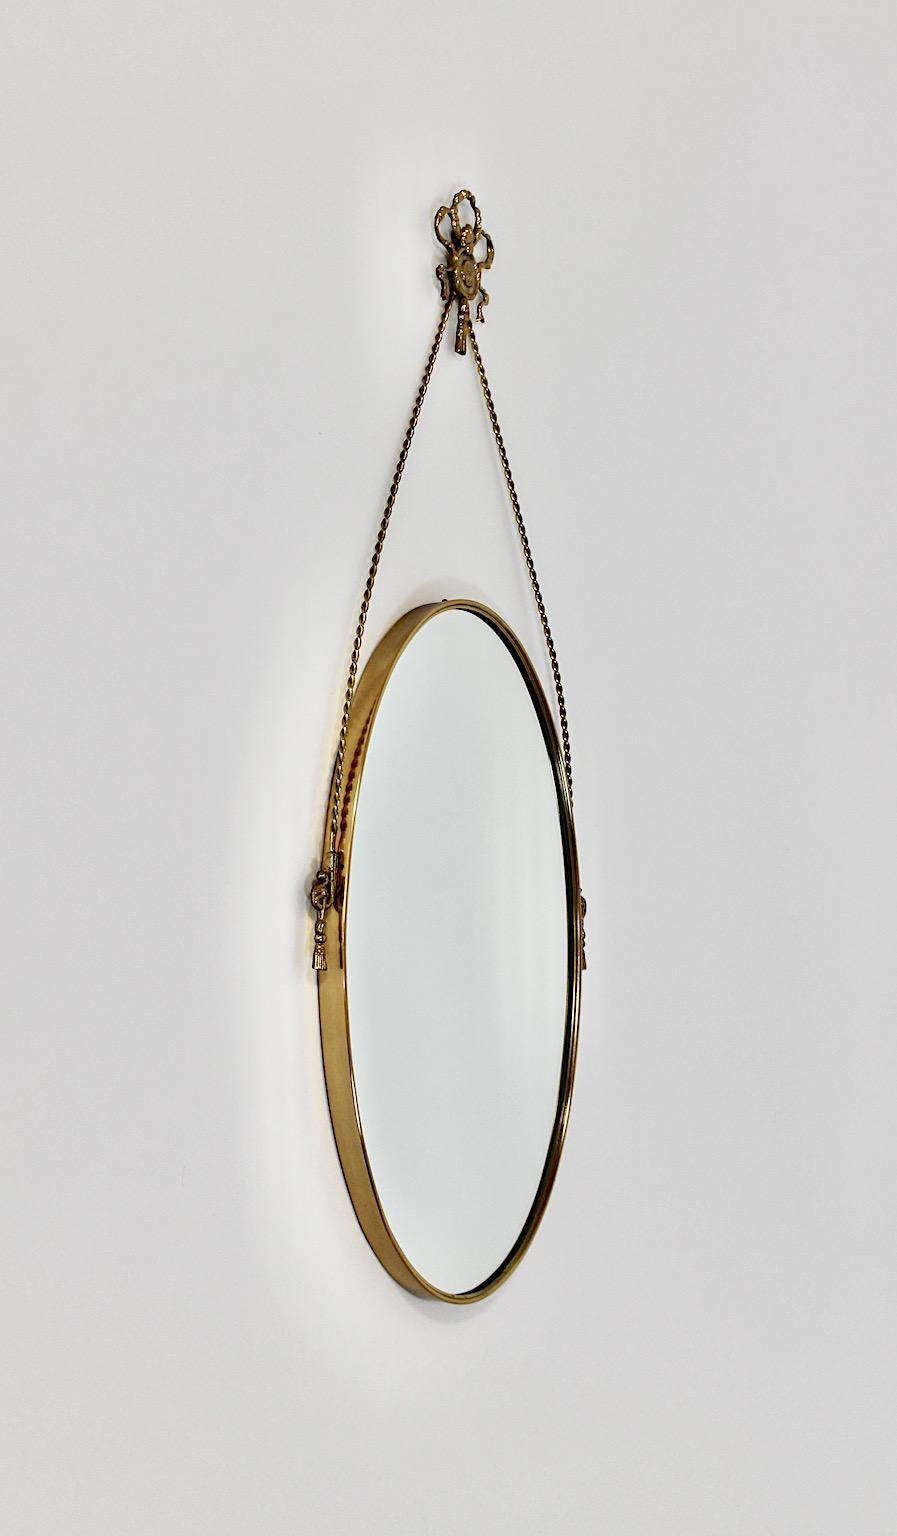 Hollywood Regency style vintage wall mirror from brass 1970s Italy.
A charming wall mirror oval like with beautiful brass details like brass cords, brass bow tie and brass rosette on each side.
This beautiful wall mirror enriches any living space